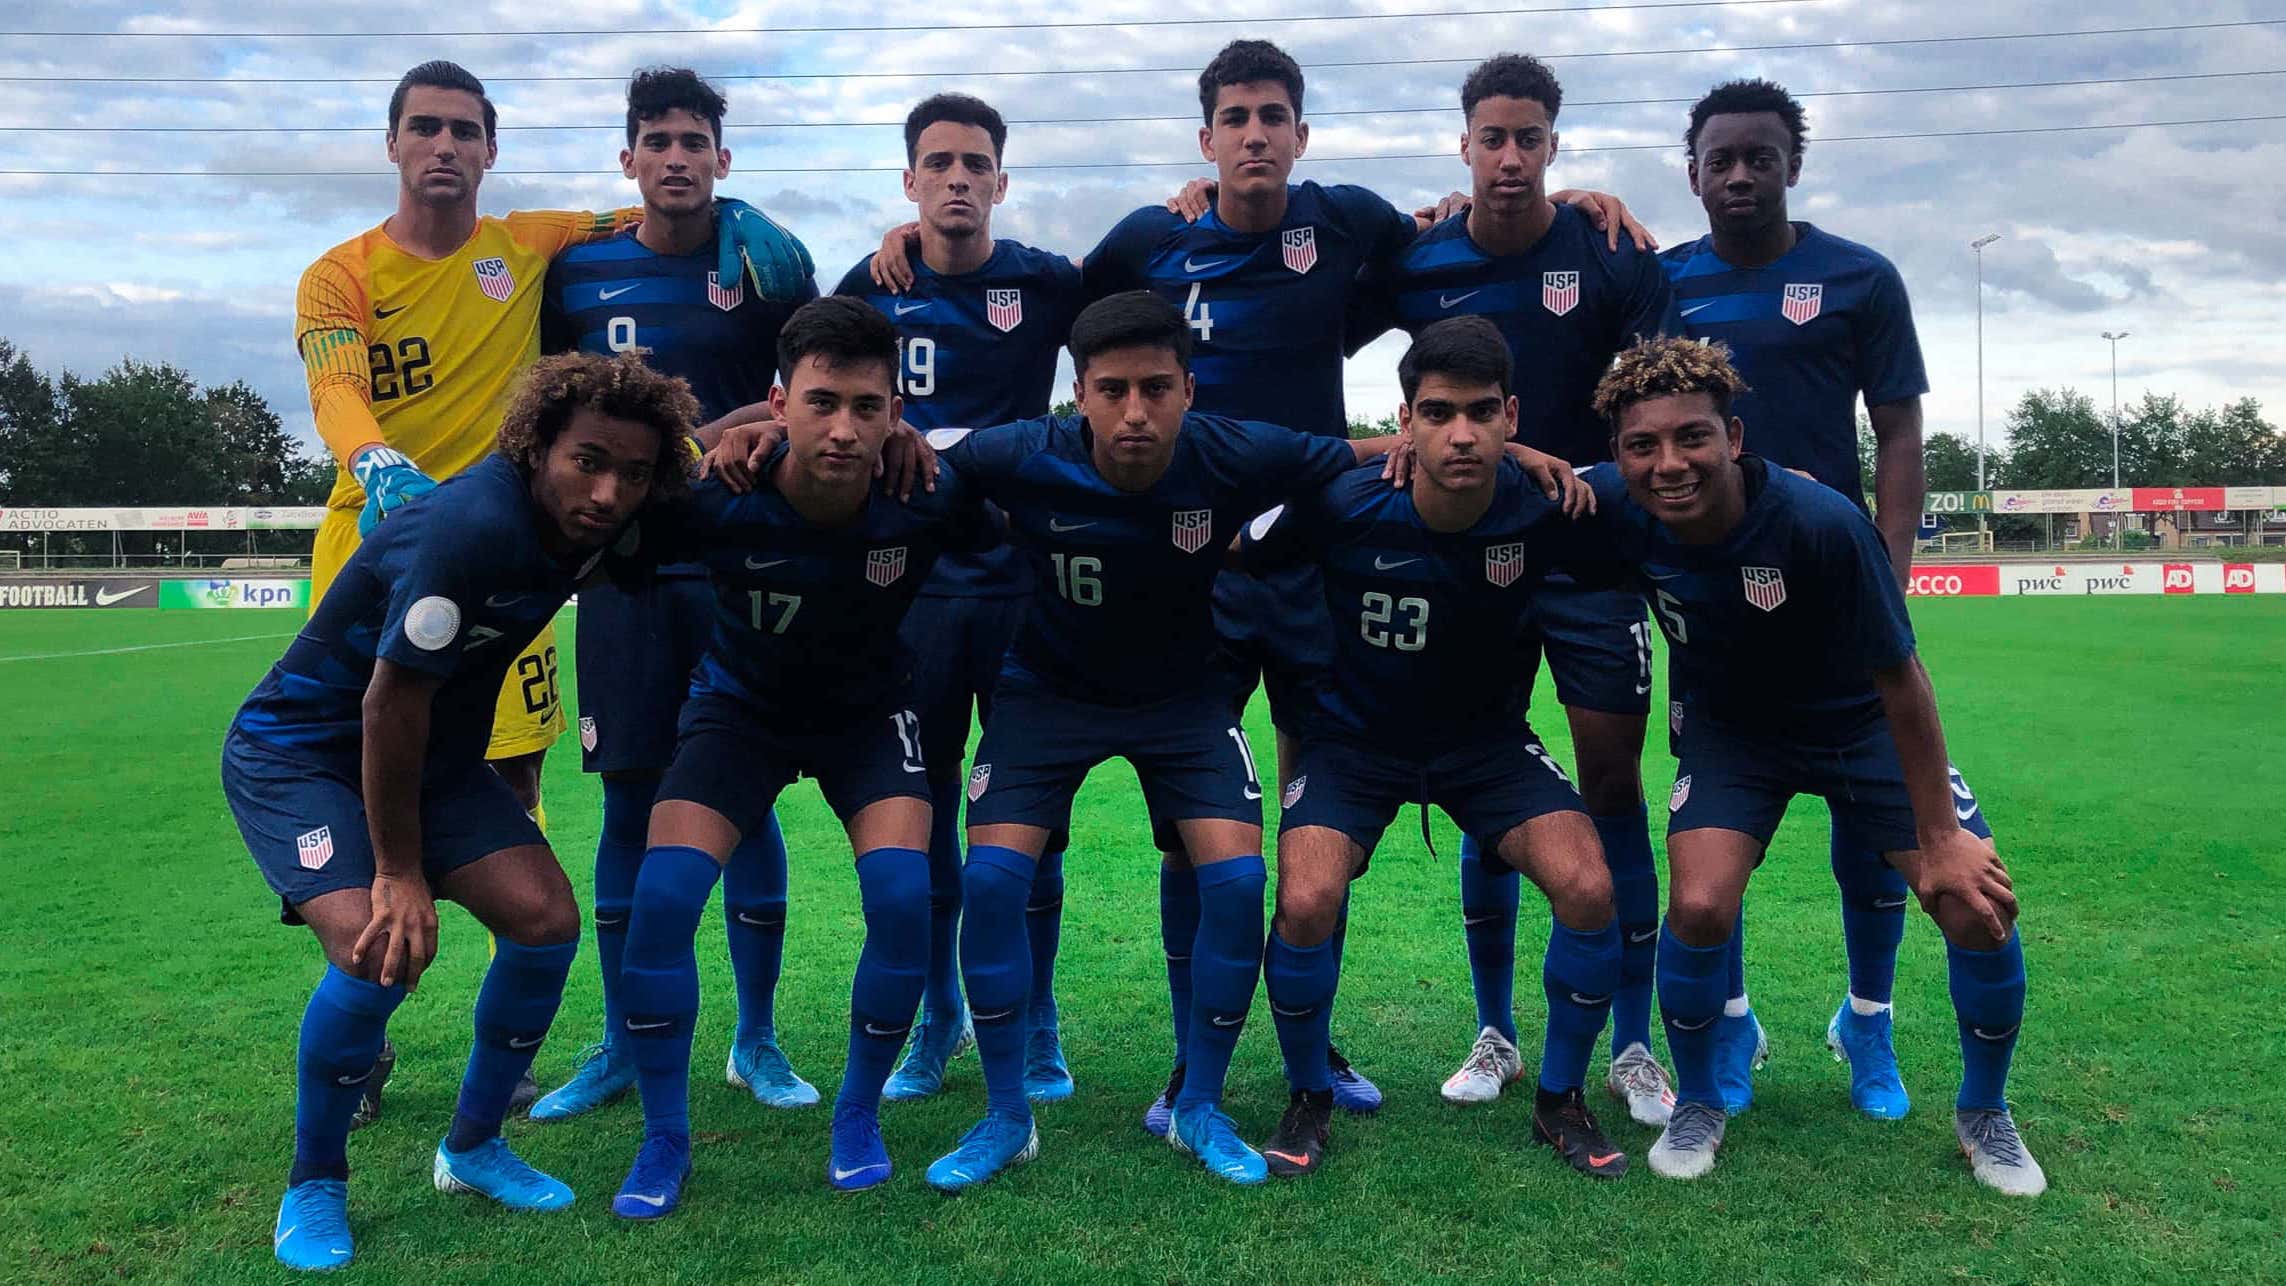 U17 5 Nations: Team USA Clinches Title